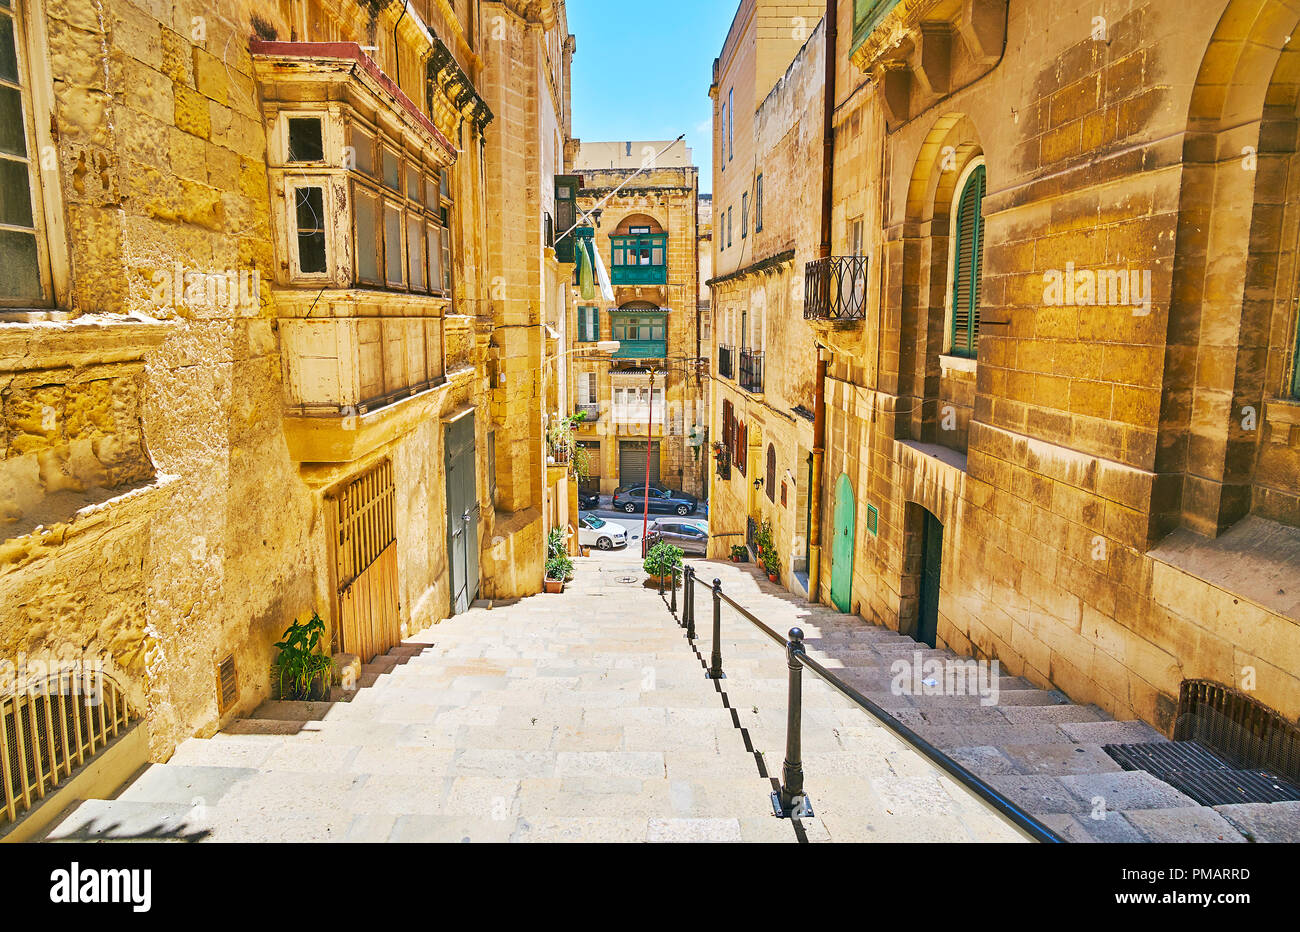 The stone staircase stretches along the narrow St Lucia street lined with old edifices, Valletta, Malta. Stock Photo